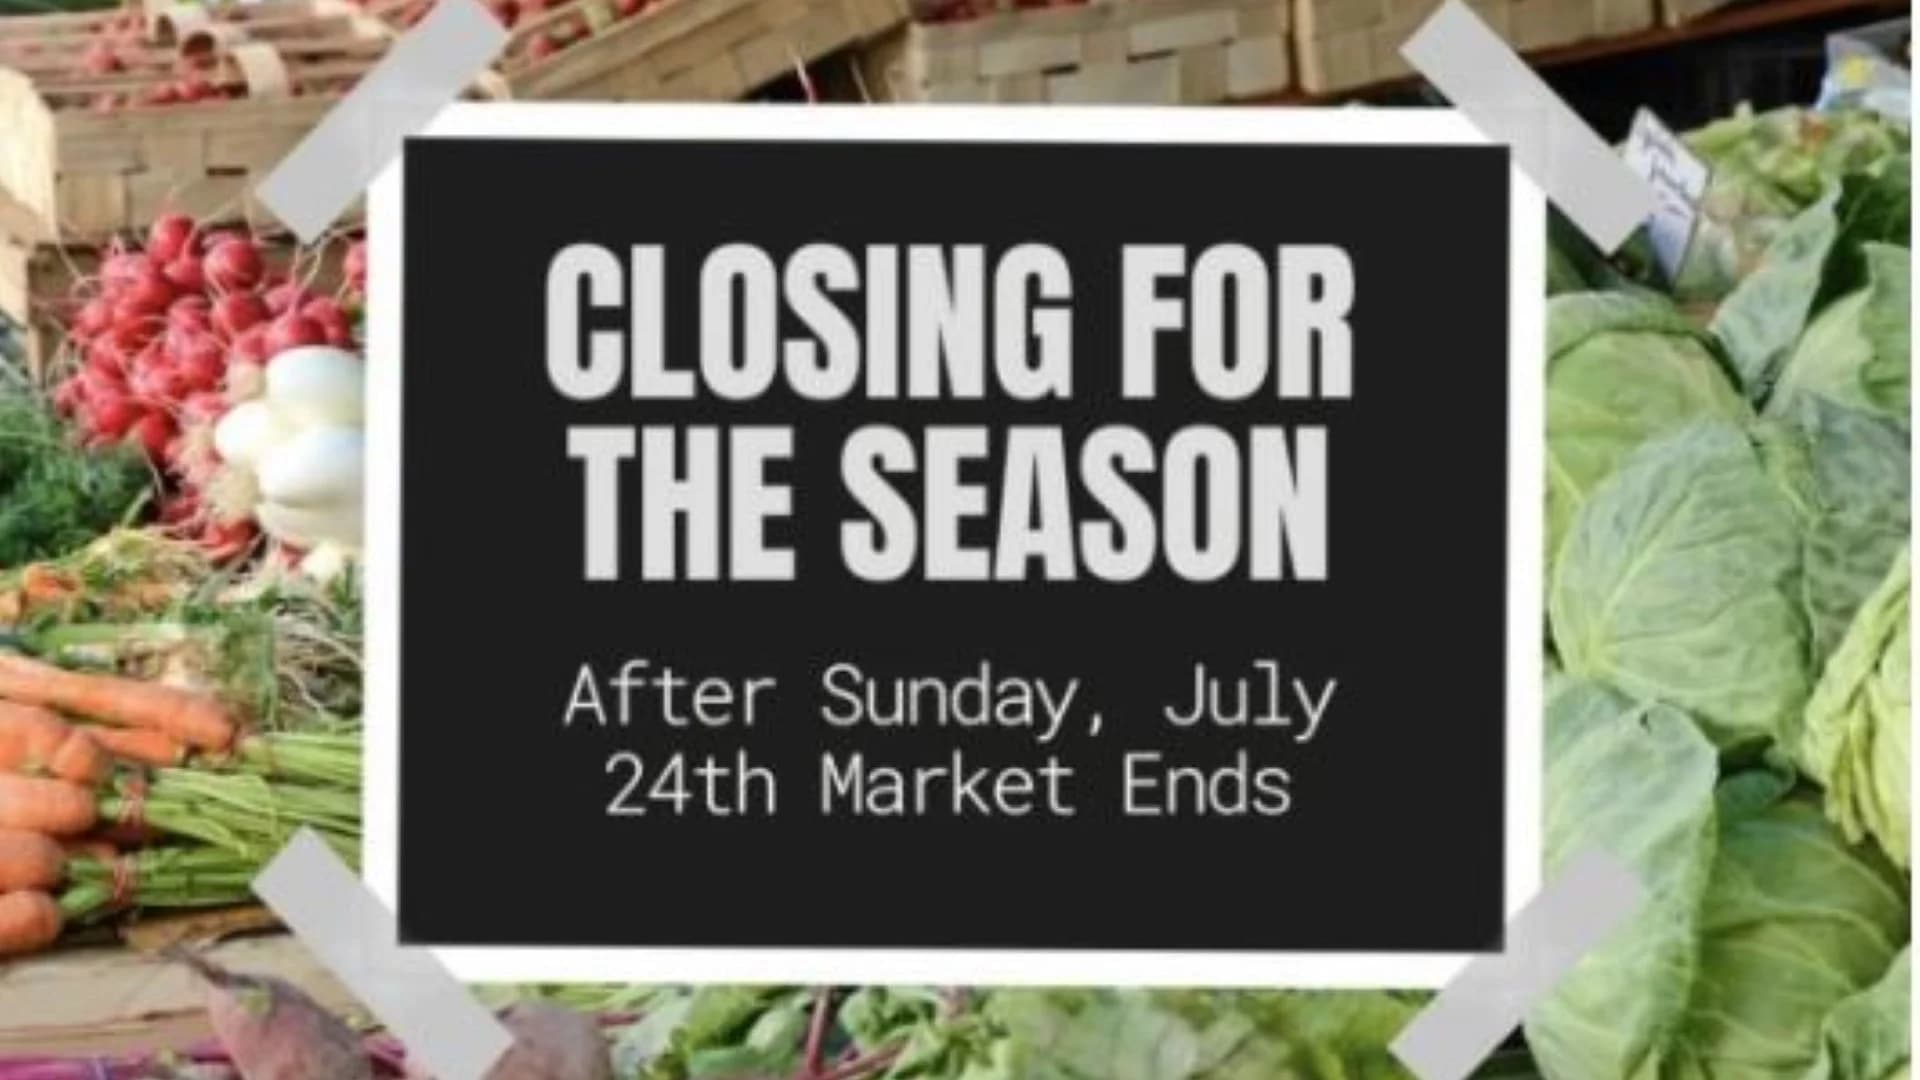 Yonkers Downtown Farmer's Market announces early closure for season